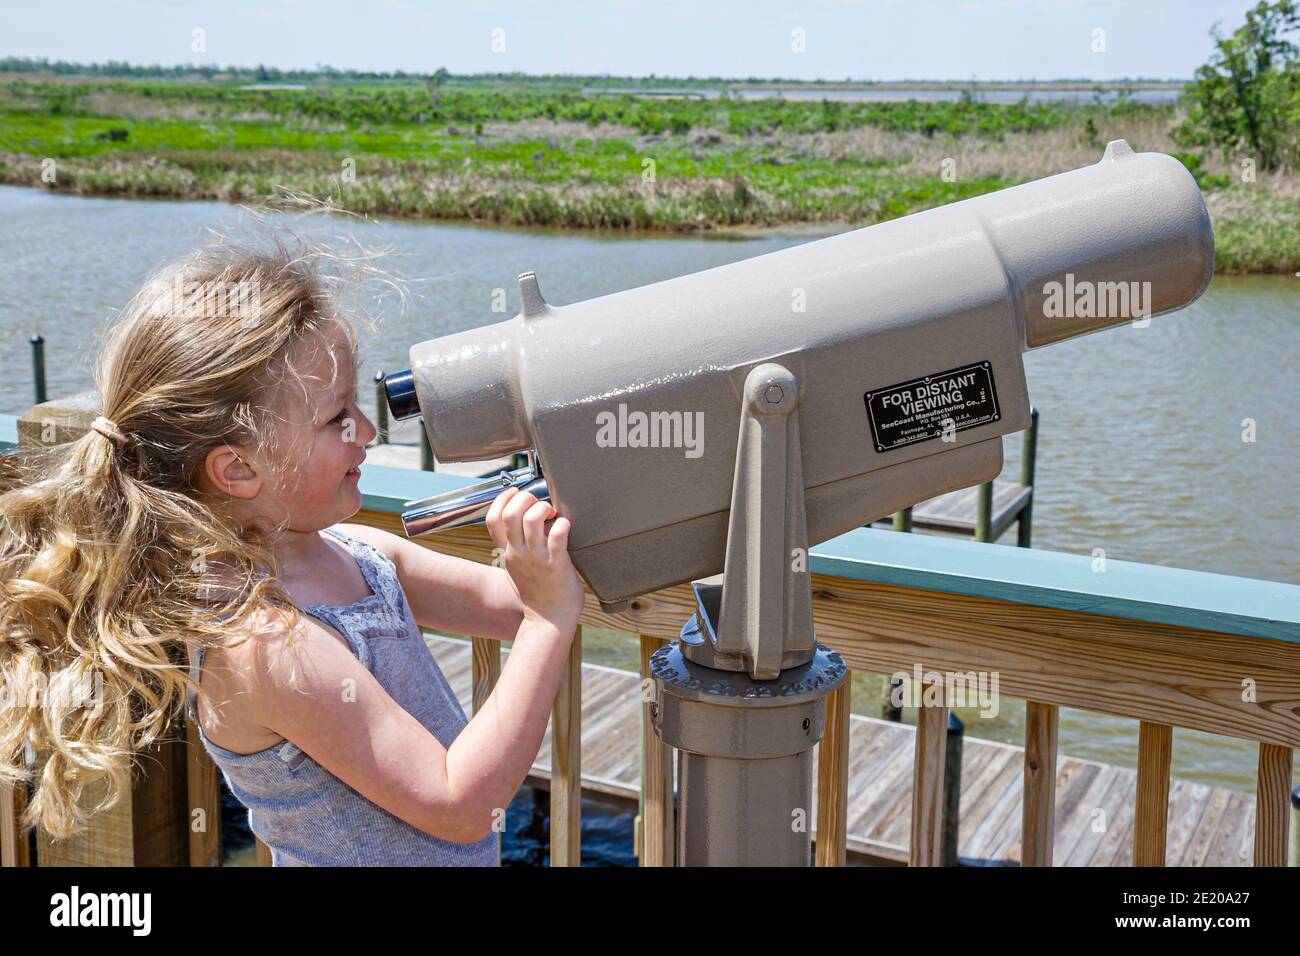 Alabama Spanish Fort 5 Rivers Alabama Delta Resource Center centre,girl looking through telescopic viewer Mobile Bay wetlands, Stock Photo